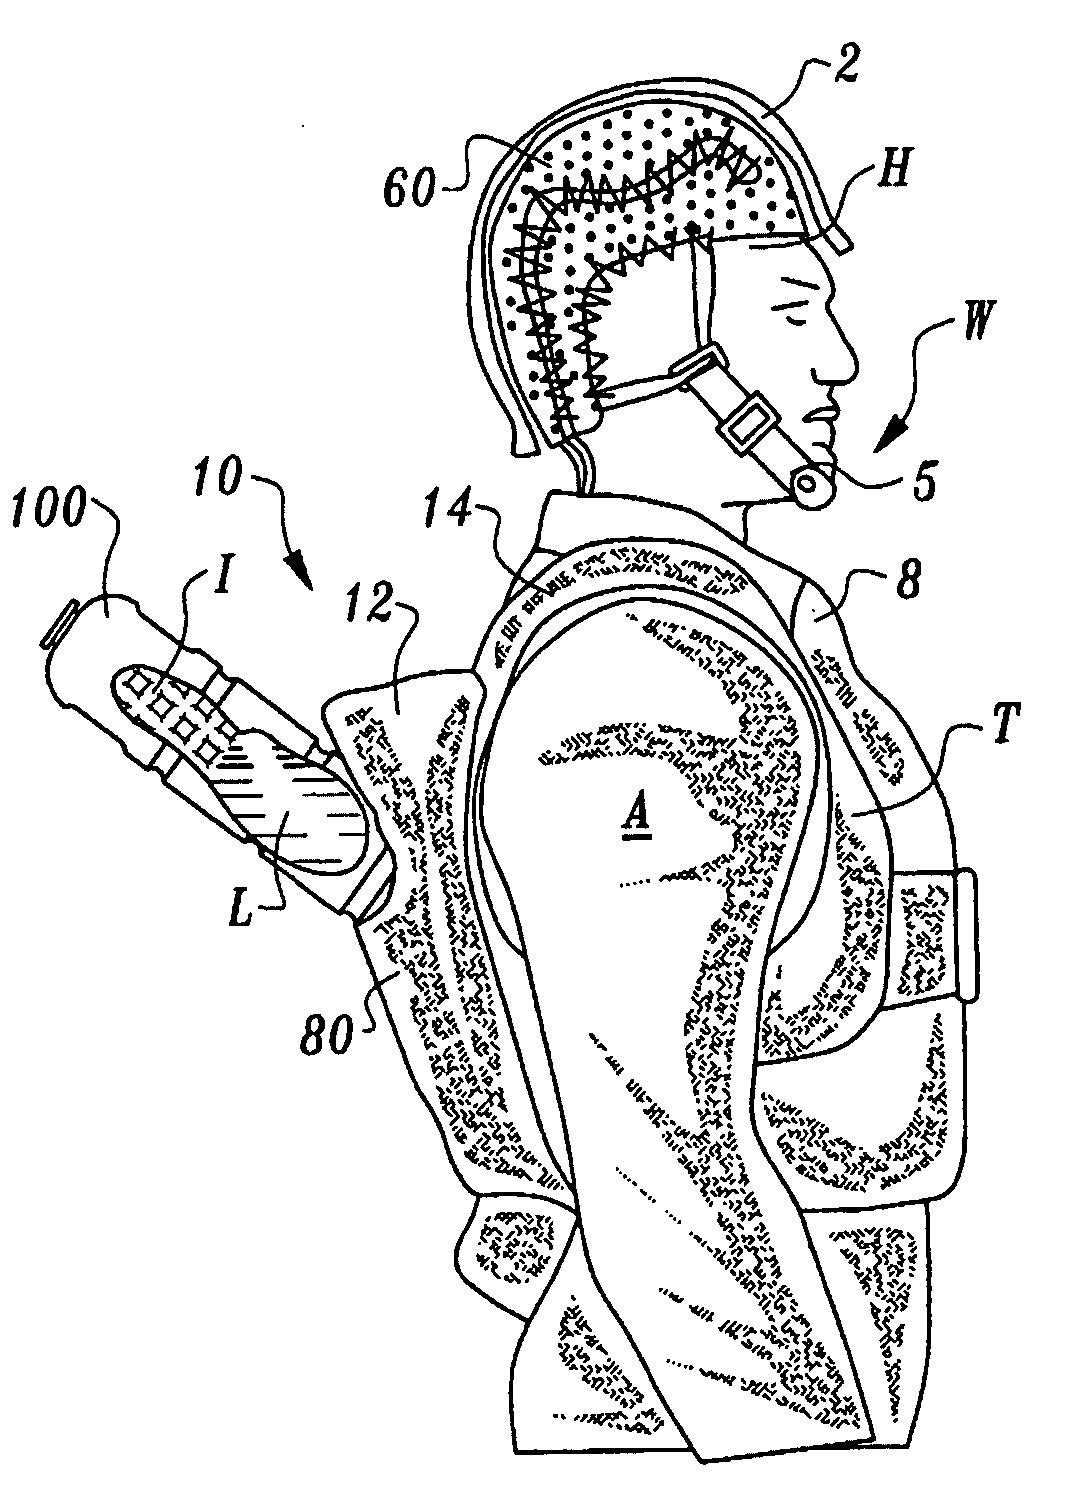 Garment for a cooling and hydration system